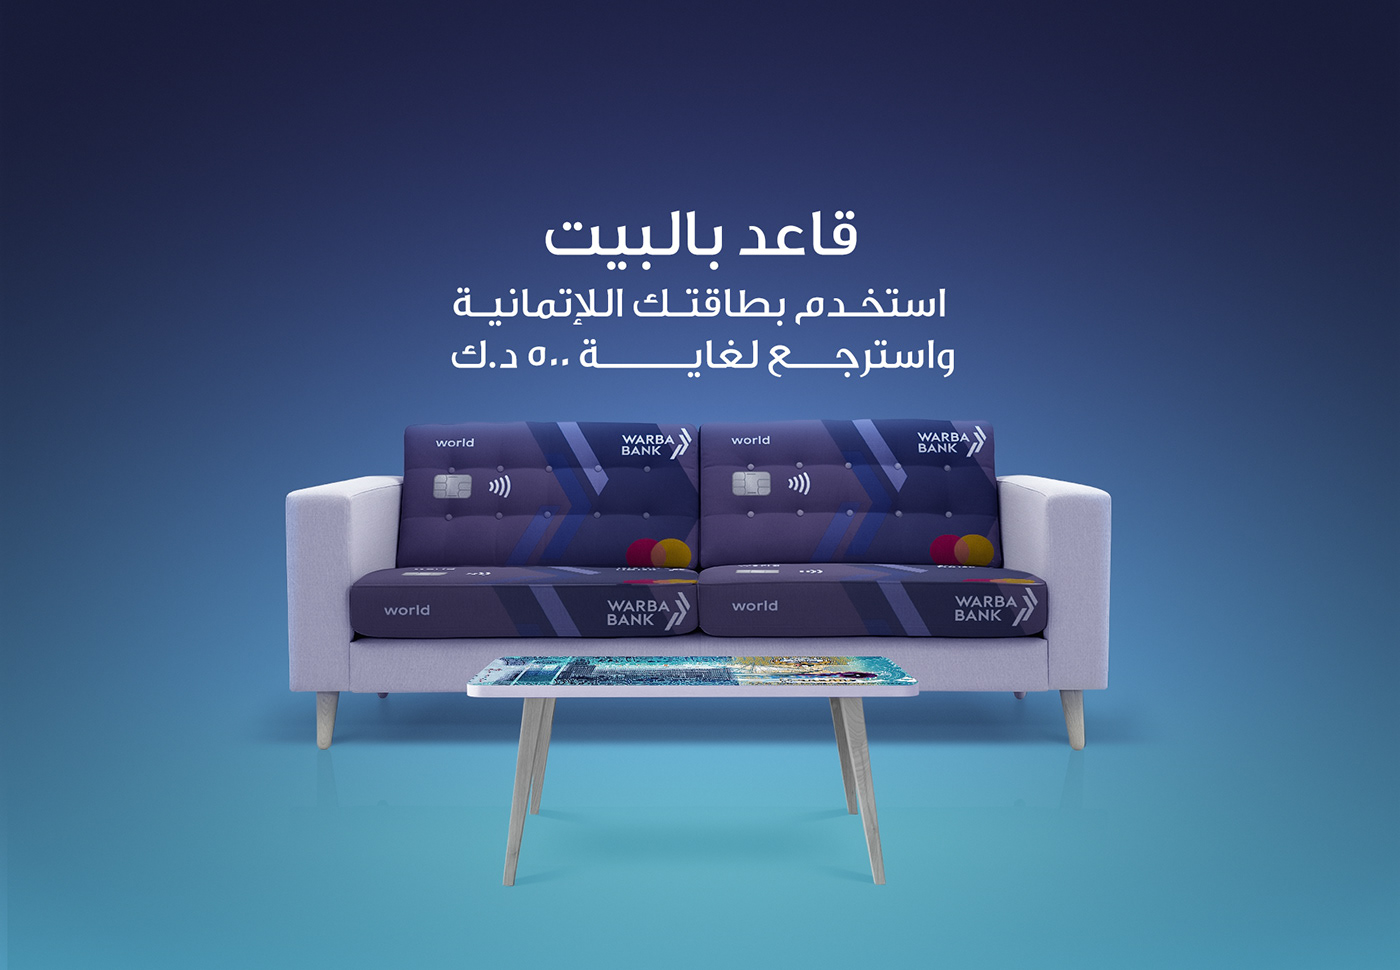 banking ads campaign corona ads Kuwait print advertising simple creative ideas Social Media ads stay home safe سوشيال ميديا ipad pro